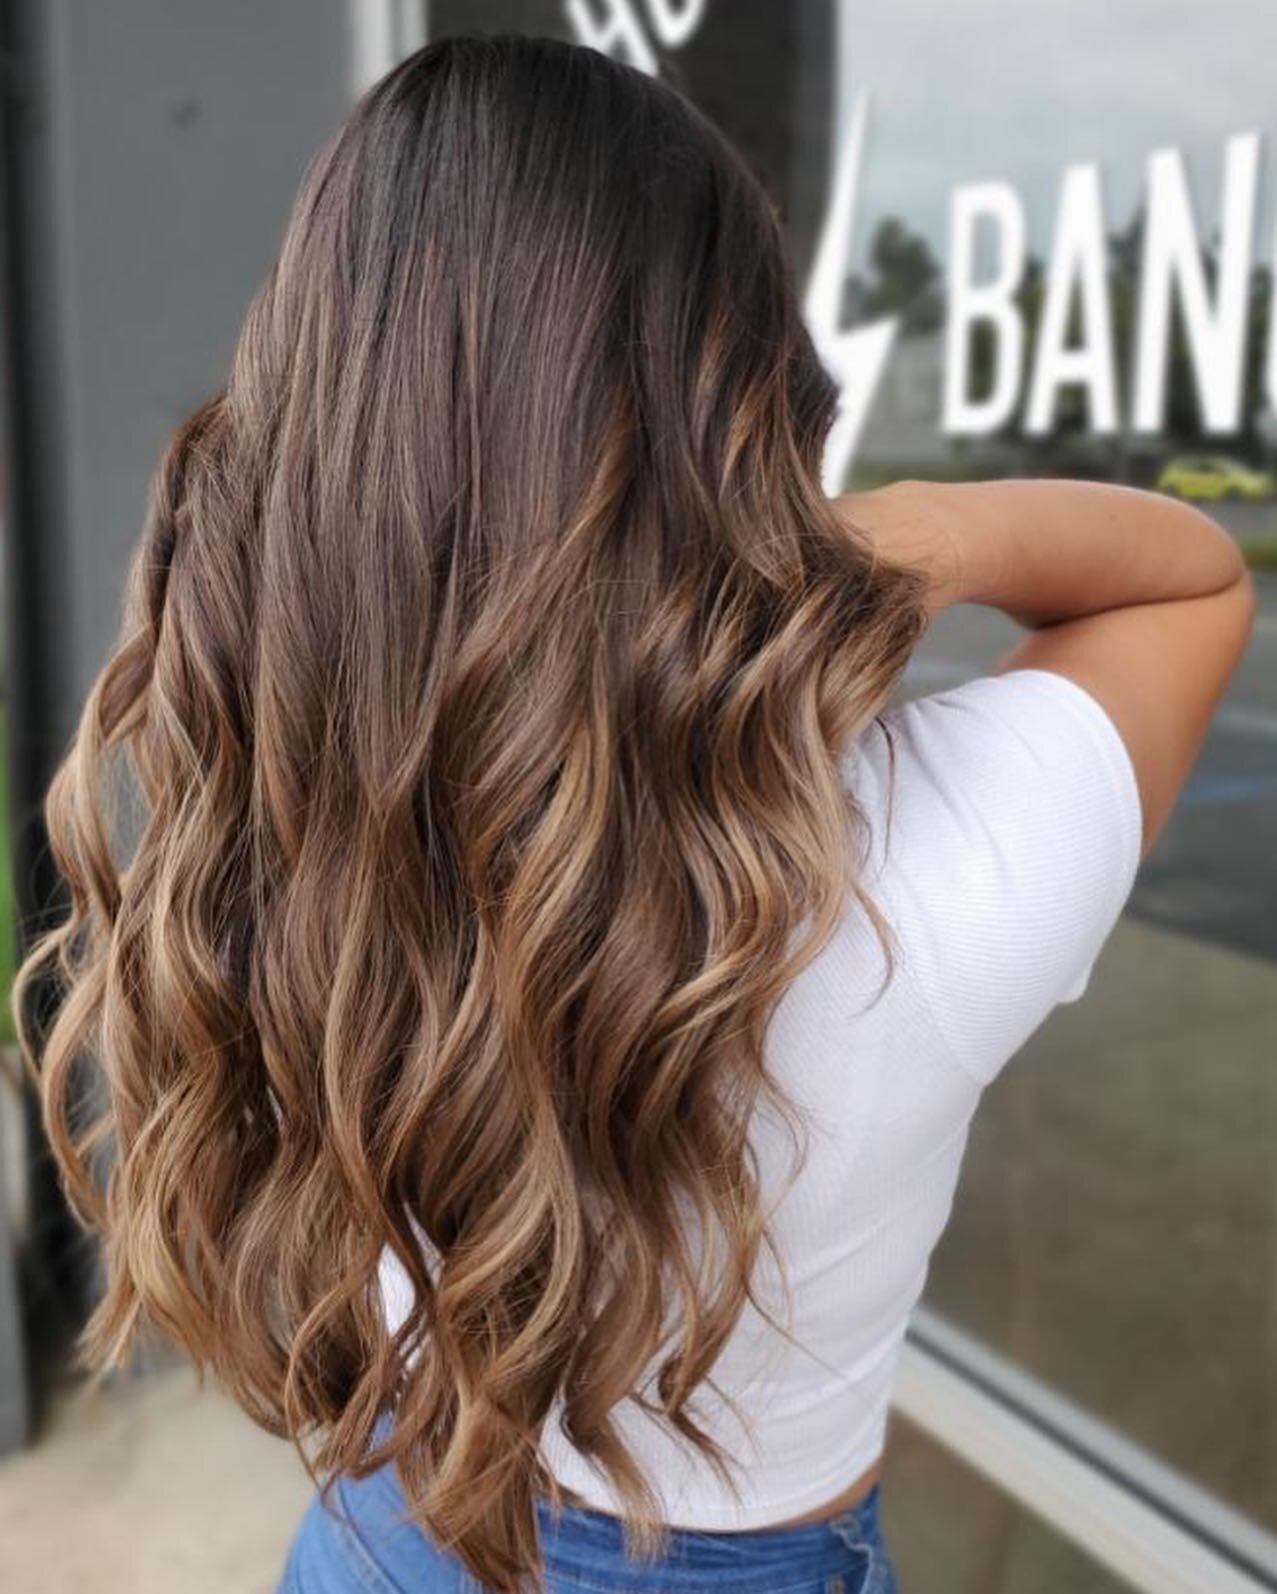 Client hadn&rsquo;t had her hair done in about 2 years &amp; came in to touch up her balayage by 
@courtneyfosterhairandmakeup ❤️&zwj;🔥 
#balayage #caramelbalayage #brownbalayage #keunecolor #vibranthair